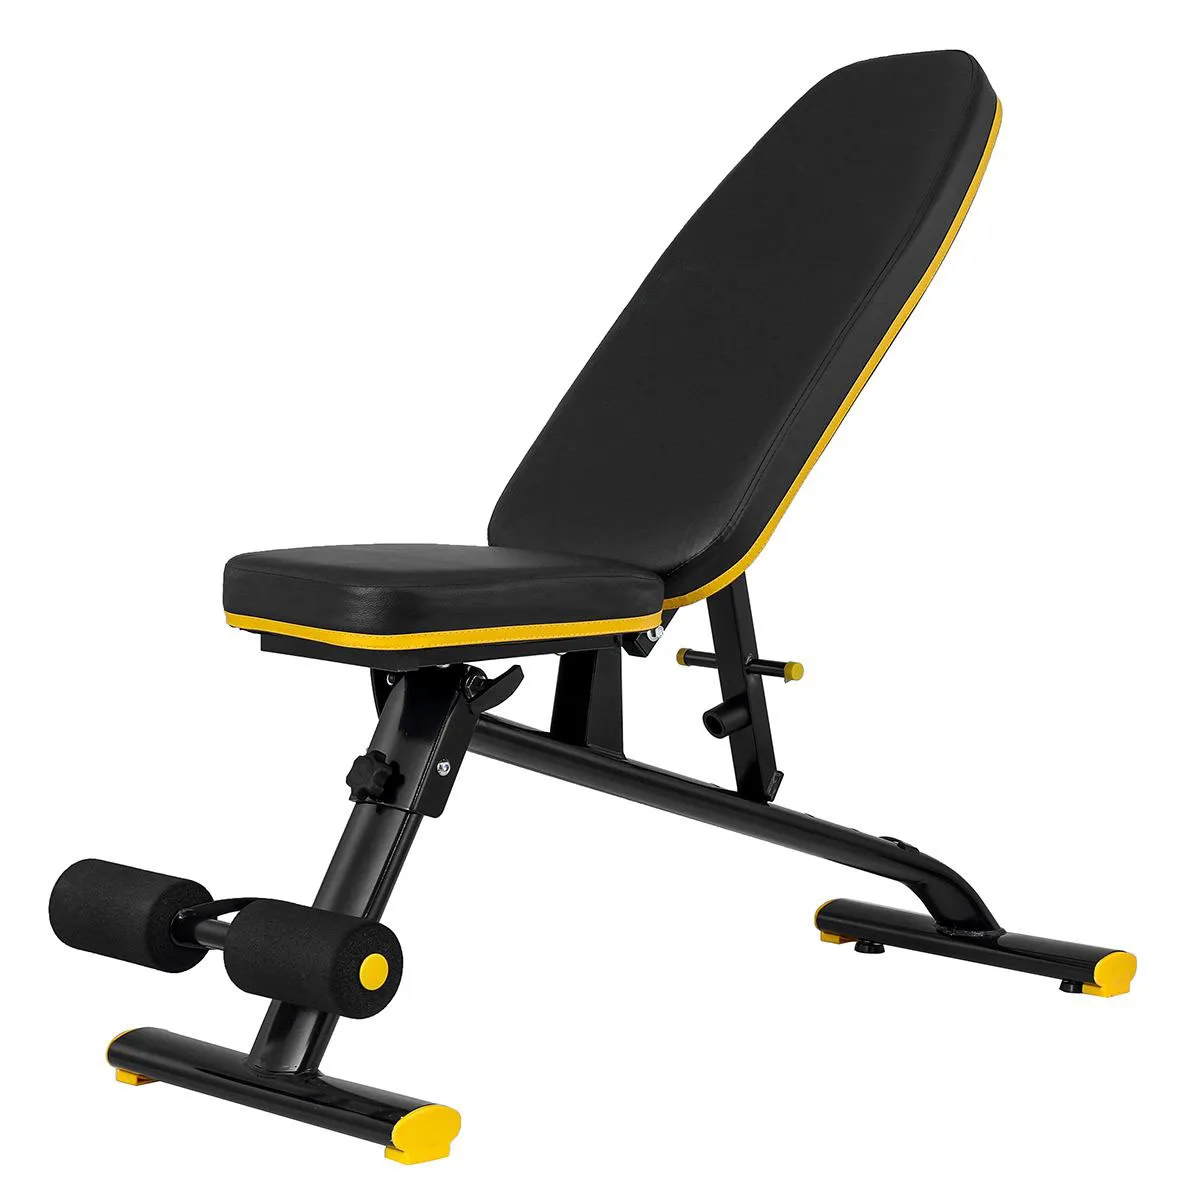 

oem banc strong load bearing sit up exercise equipment adjustable bench at home gym 2020 best multi-functional, Customized